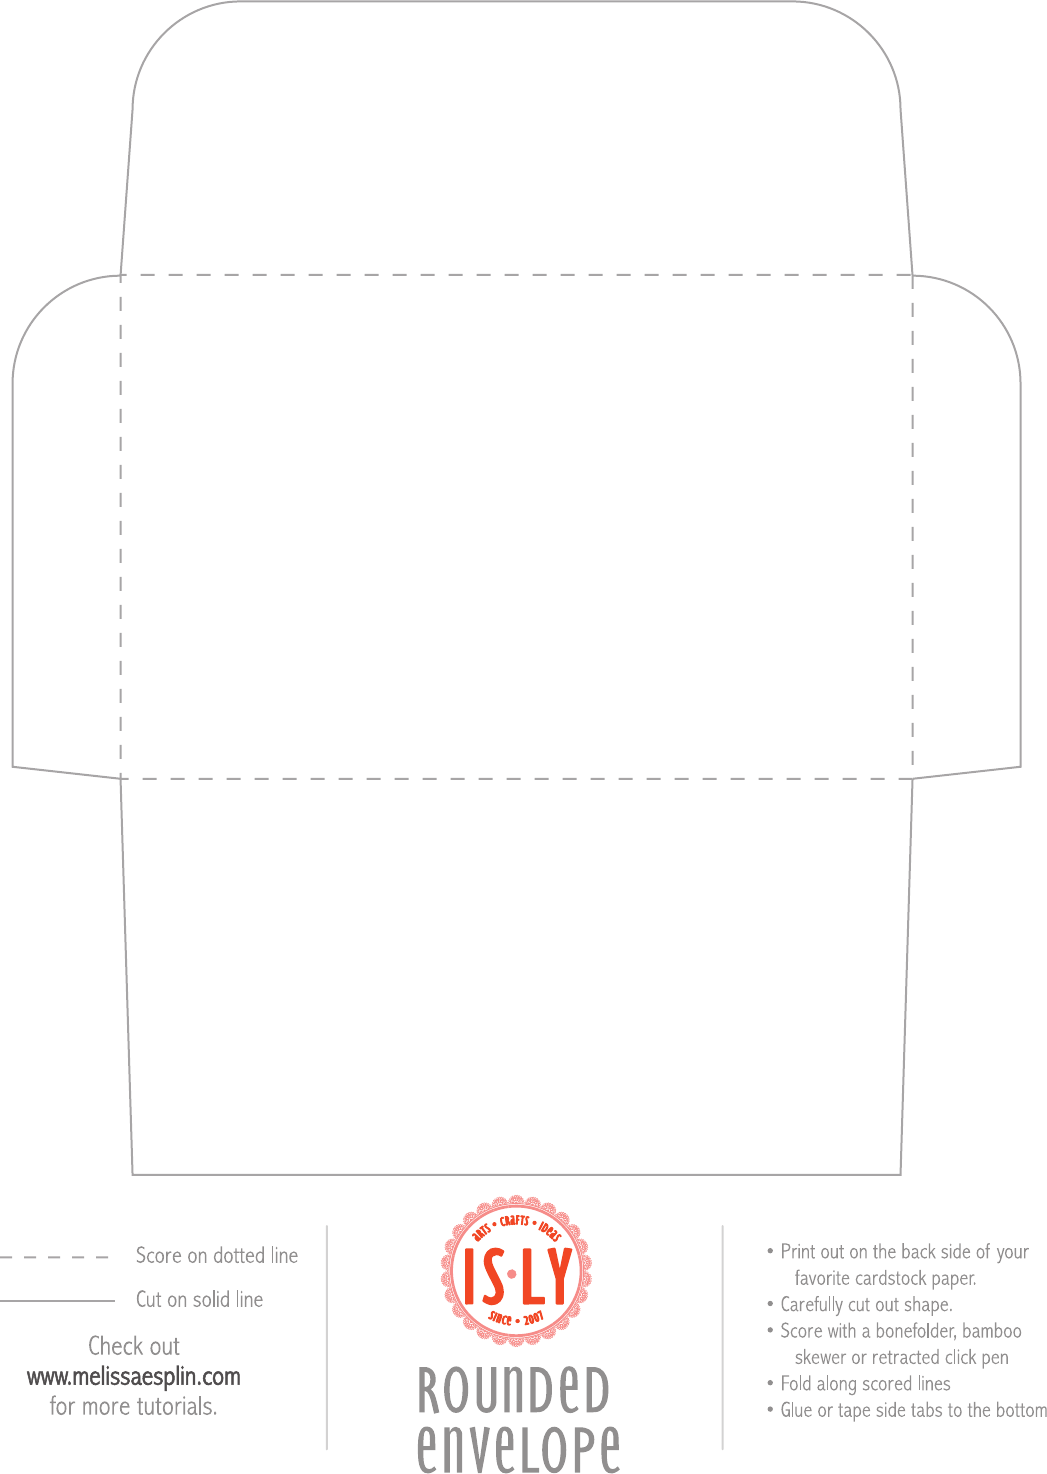 Free Rounded Envelope Template - PDF | 533KB | 1 Page(s)